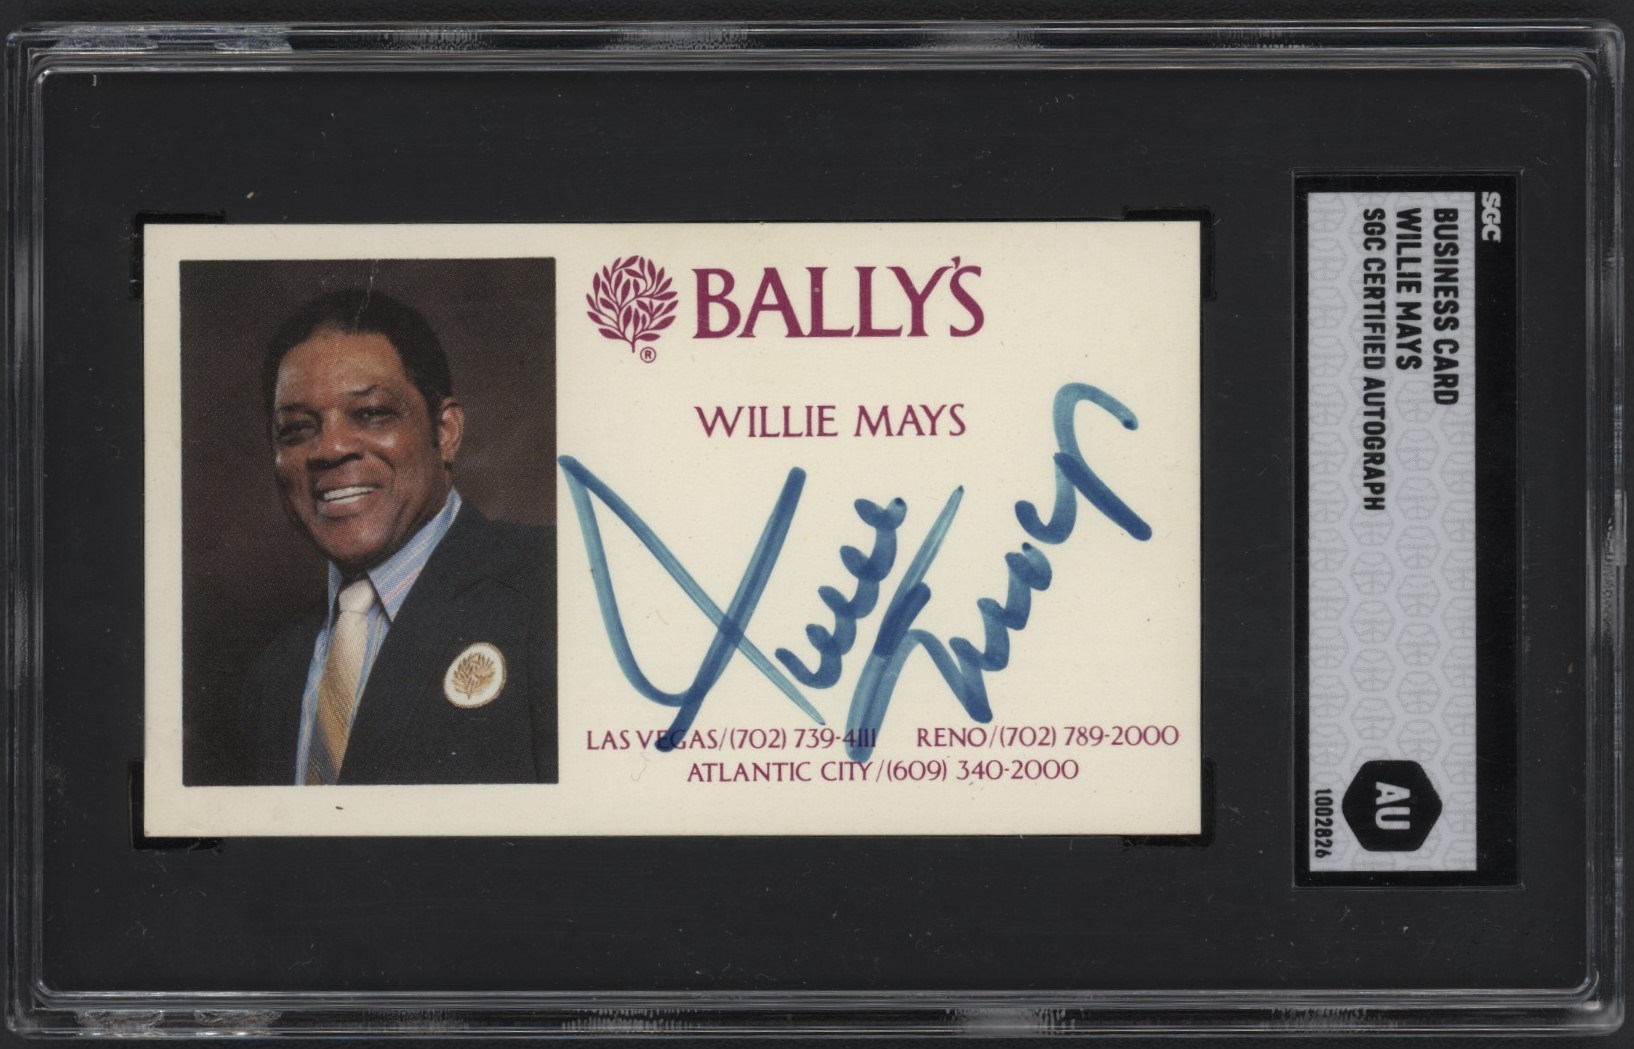 - 1970's Willie Mays Bally's Gambling Business Card (SGC)